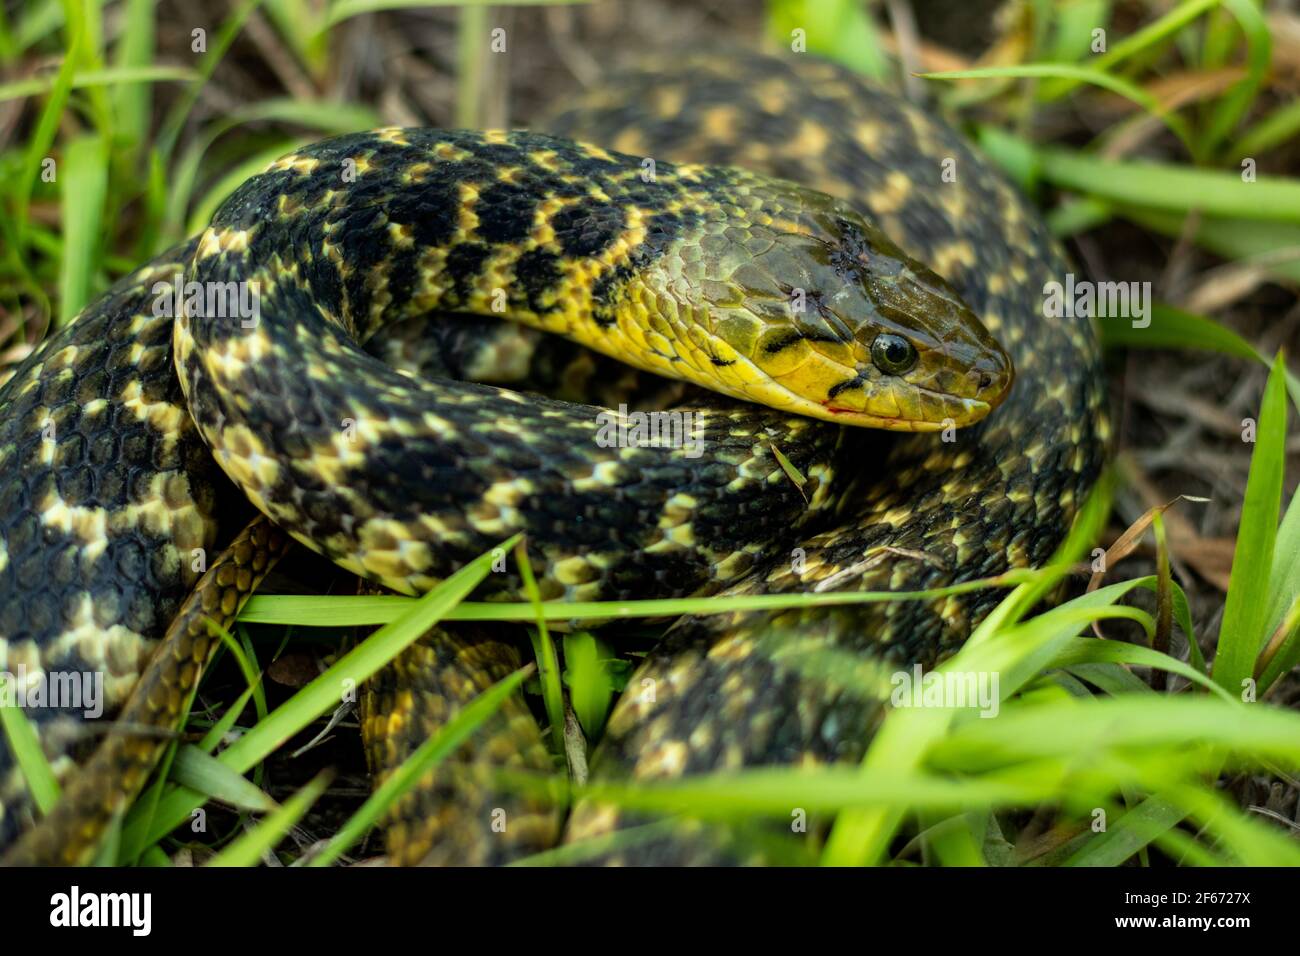 The buff striped keelback or Amphiesma stolatum snake is a species of nonvenomous colubrid snake found across Asia and sitting in the green grass look Stock Photo